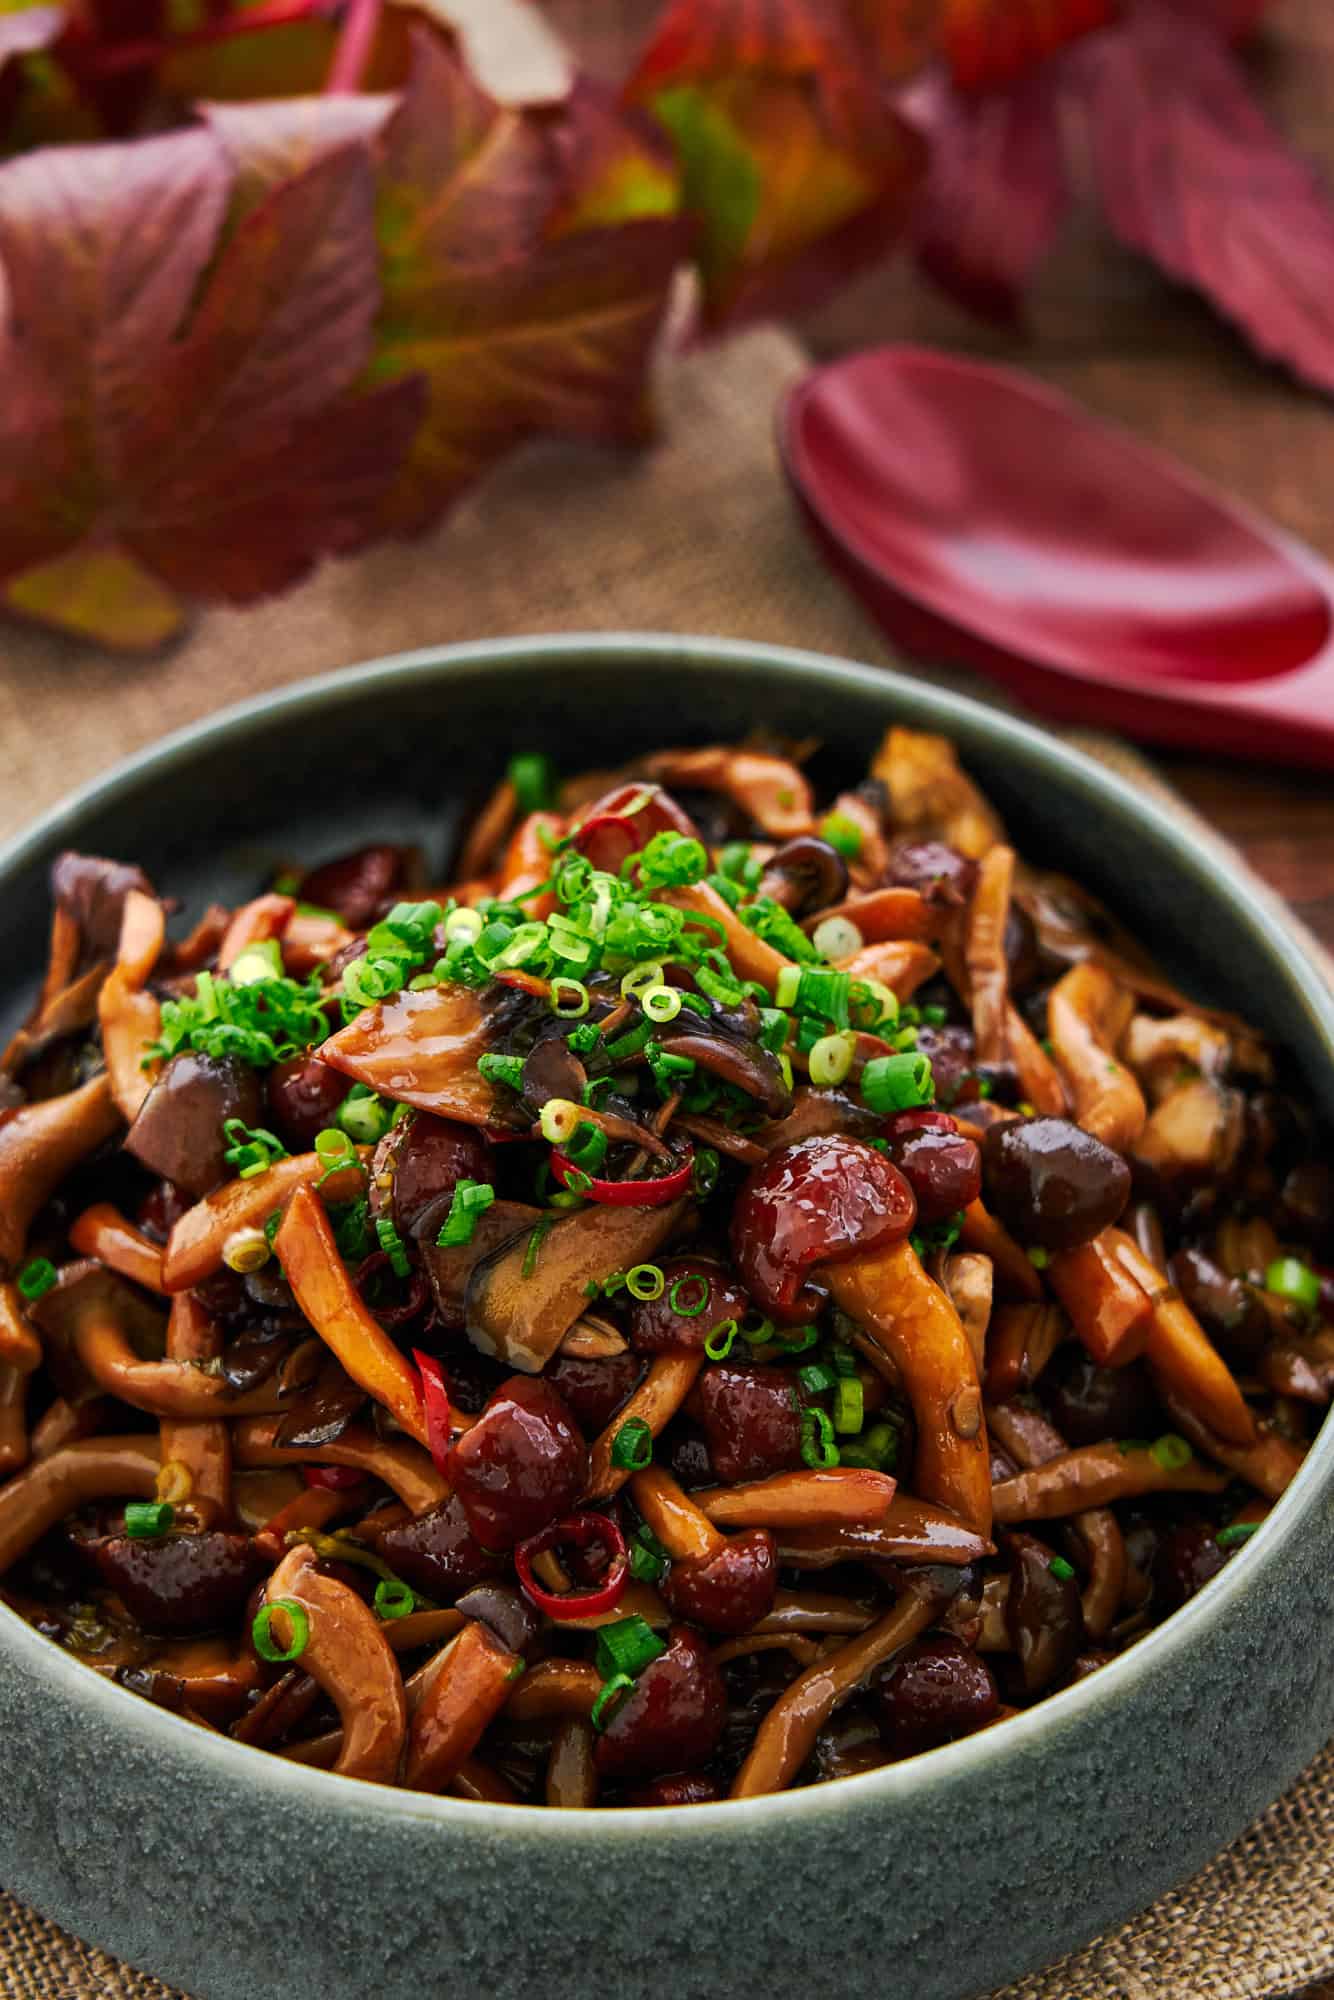 Easy make ahead marinated mushrooms marinated in a tangy sweet brine make for a delicious appetizer and condiment.